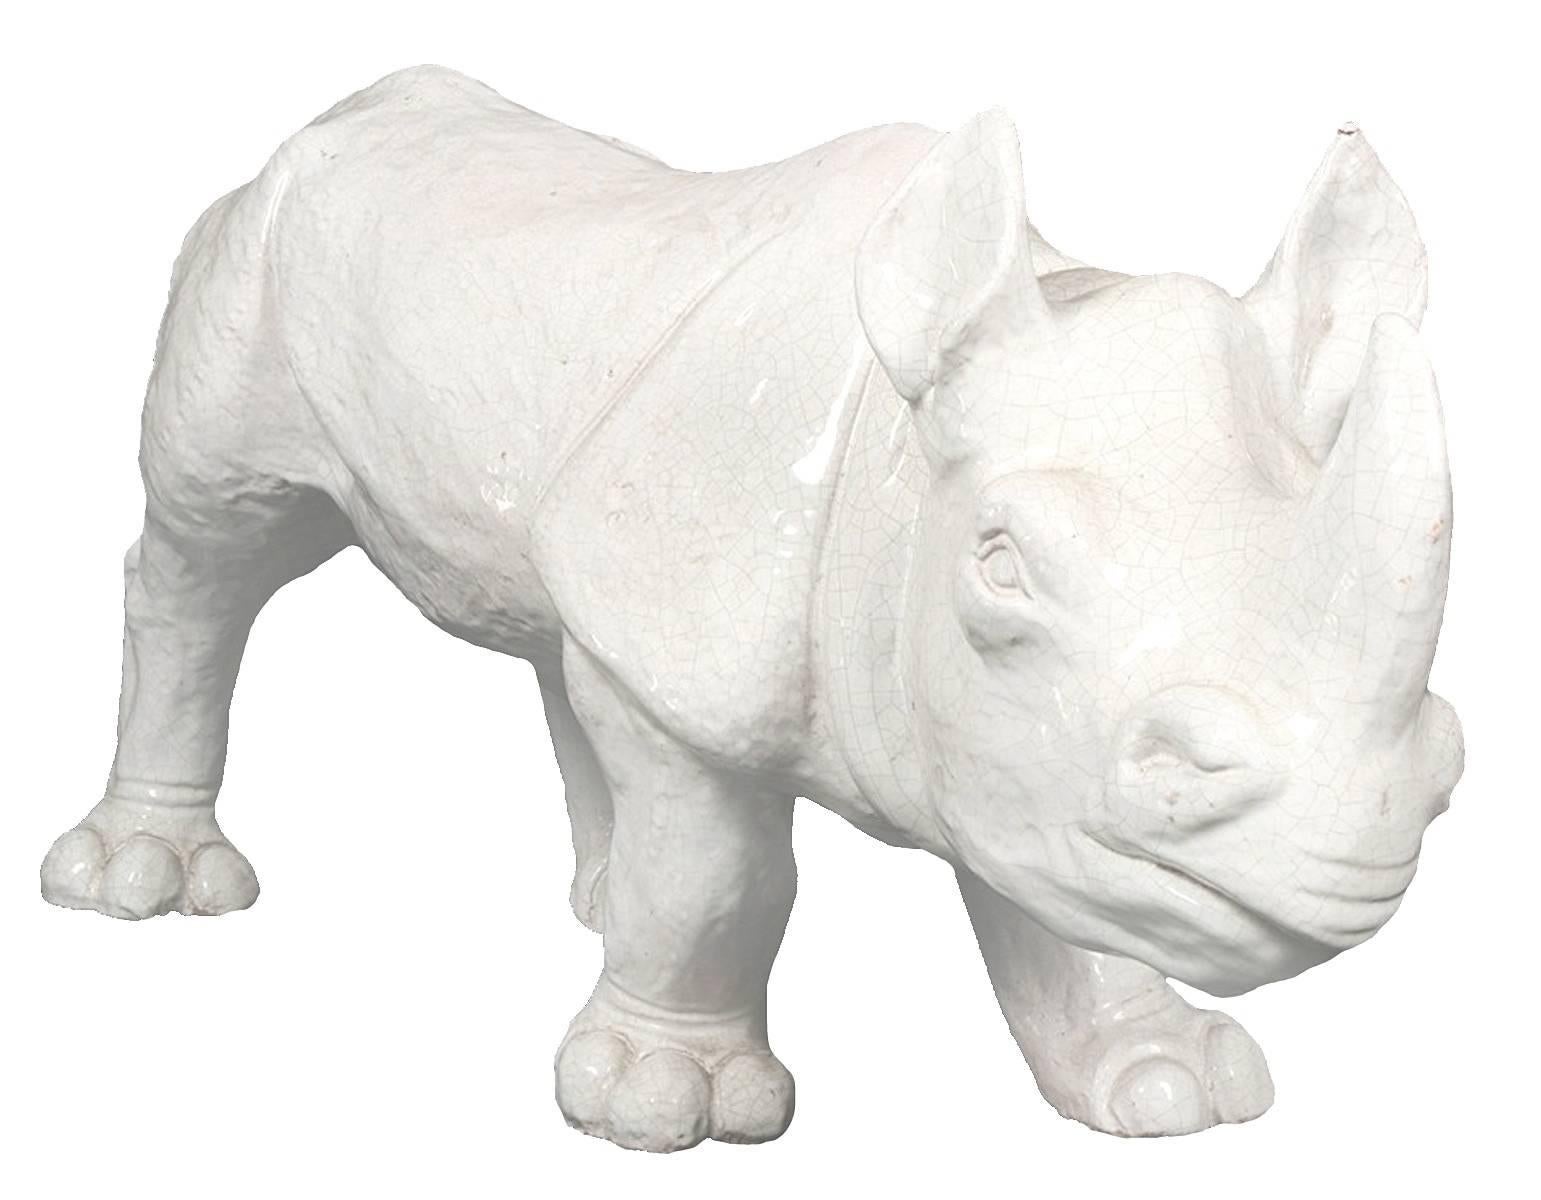 Large statement making 1970s rhino. Overall white crackle glaze finish. 
Light wear around the edges and feet. Attributed to Trouvailles Furniture Inc.